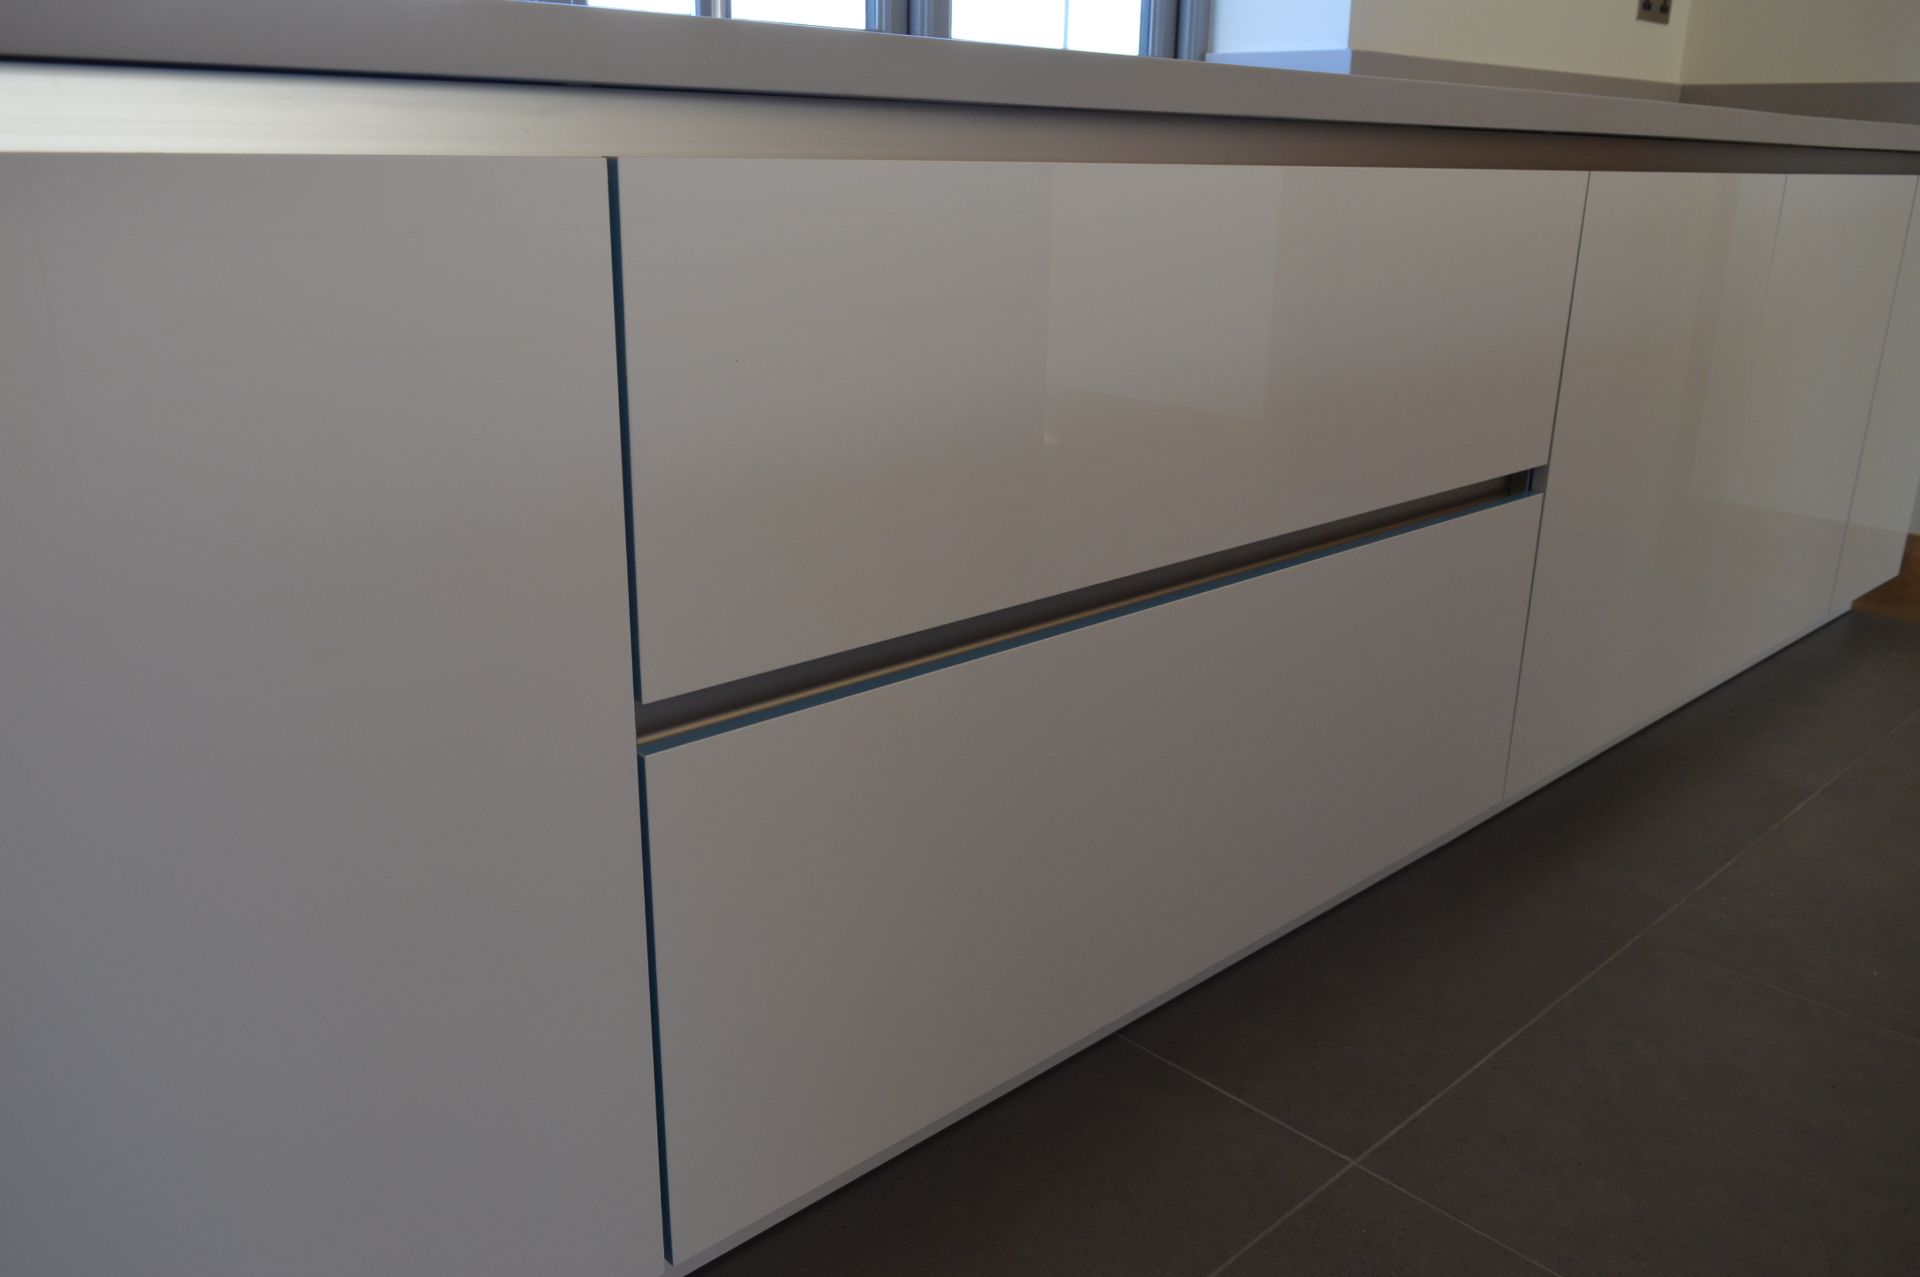 1 x Stunning KELLER Handleless FITTED KITCHEN With Corian Clay Worktops, Centre Island With - Image 32 of 104